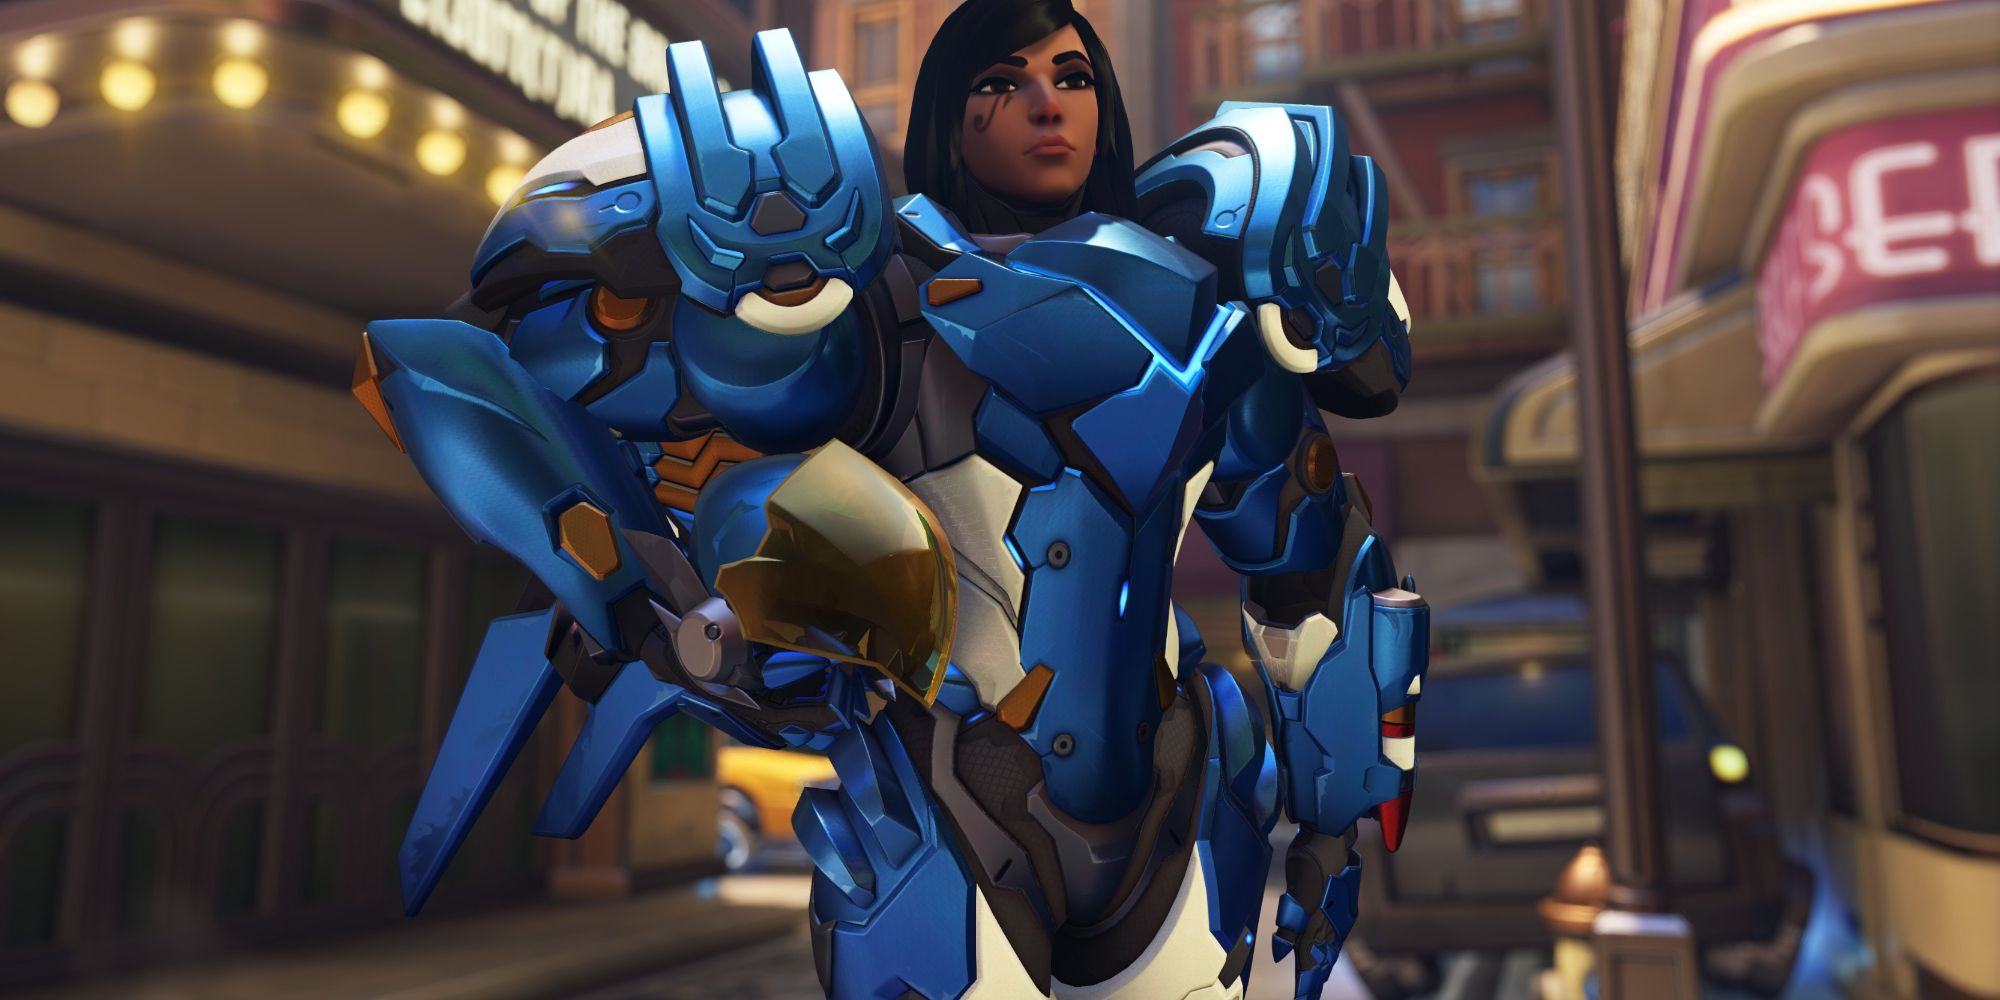 Pharah in Overwatch 2 posing up close